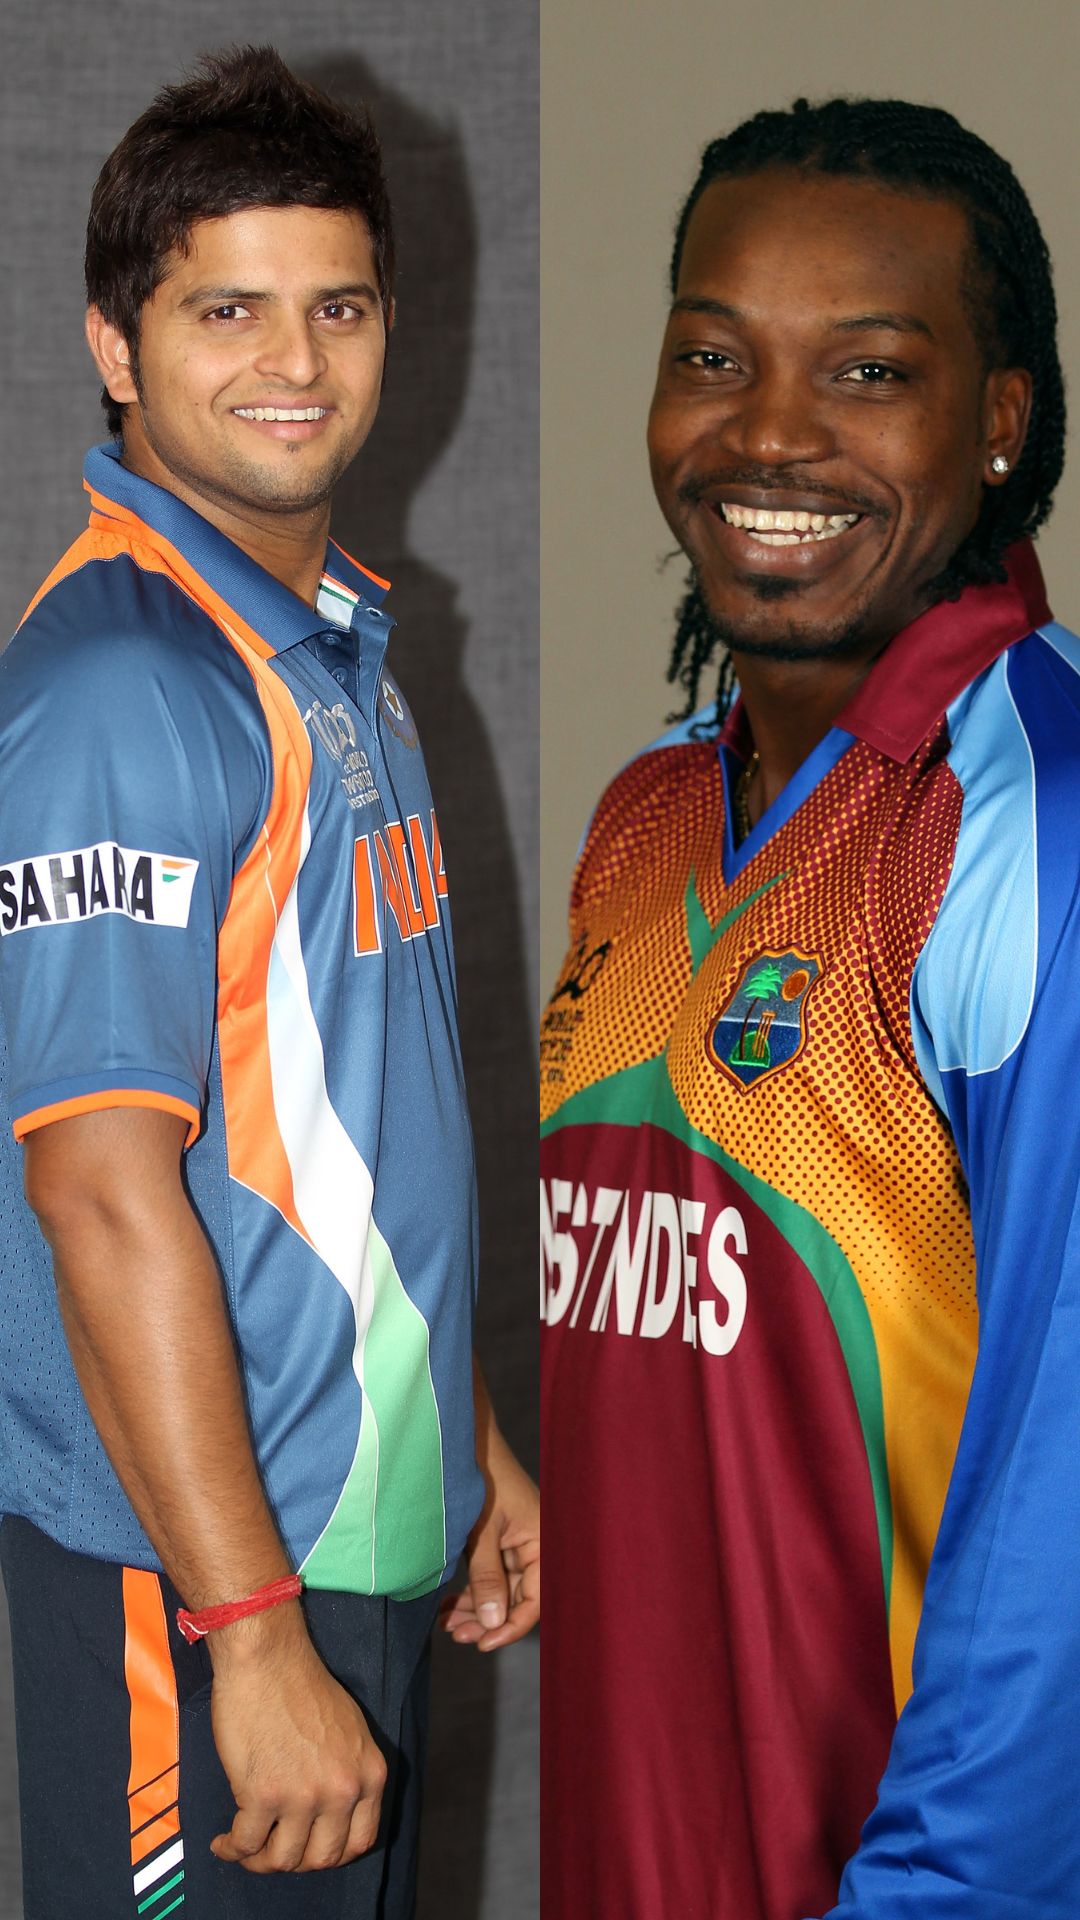 Raina to Gayle: First ever centurions for each team in T20 World Cup